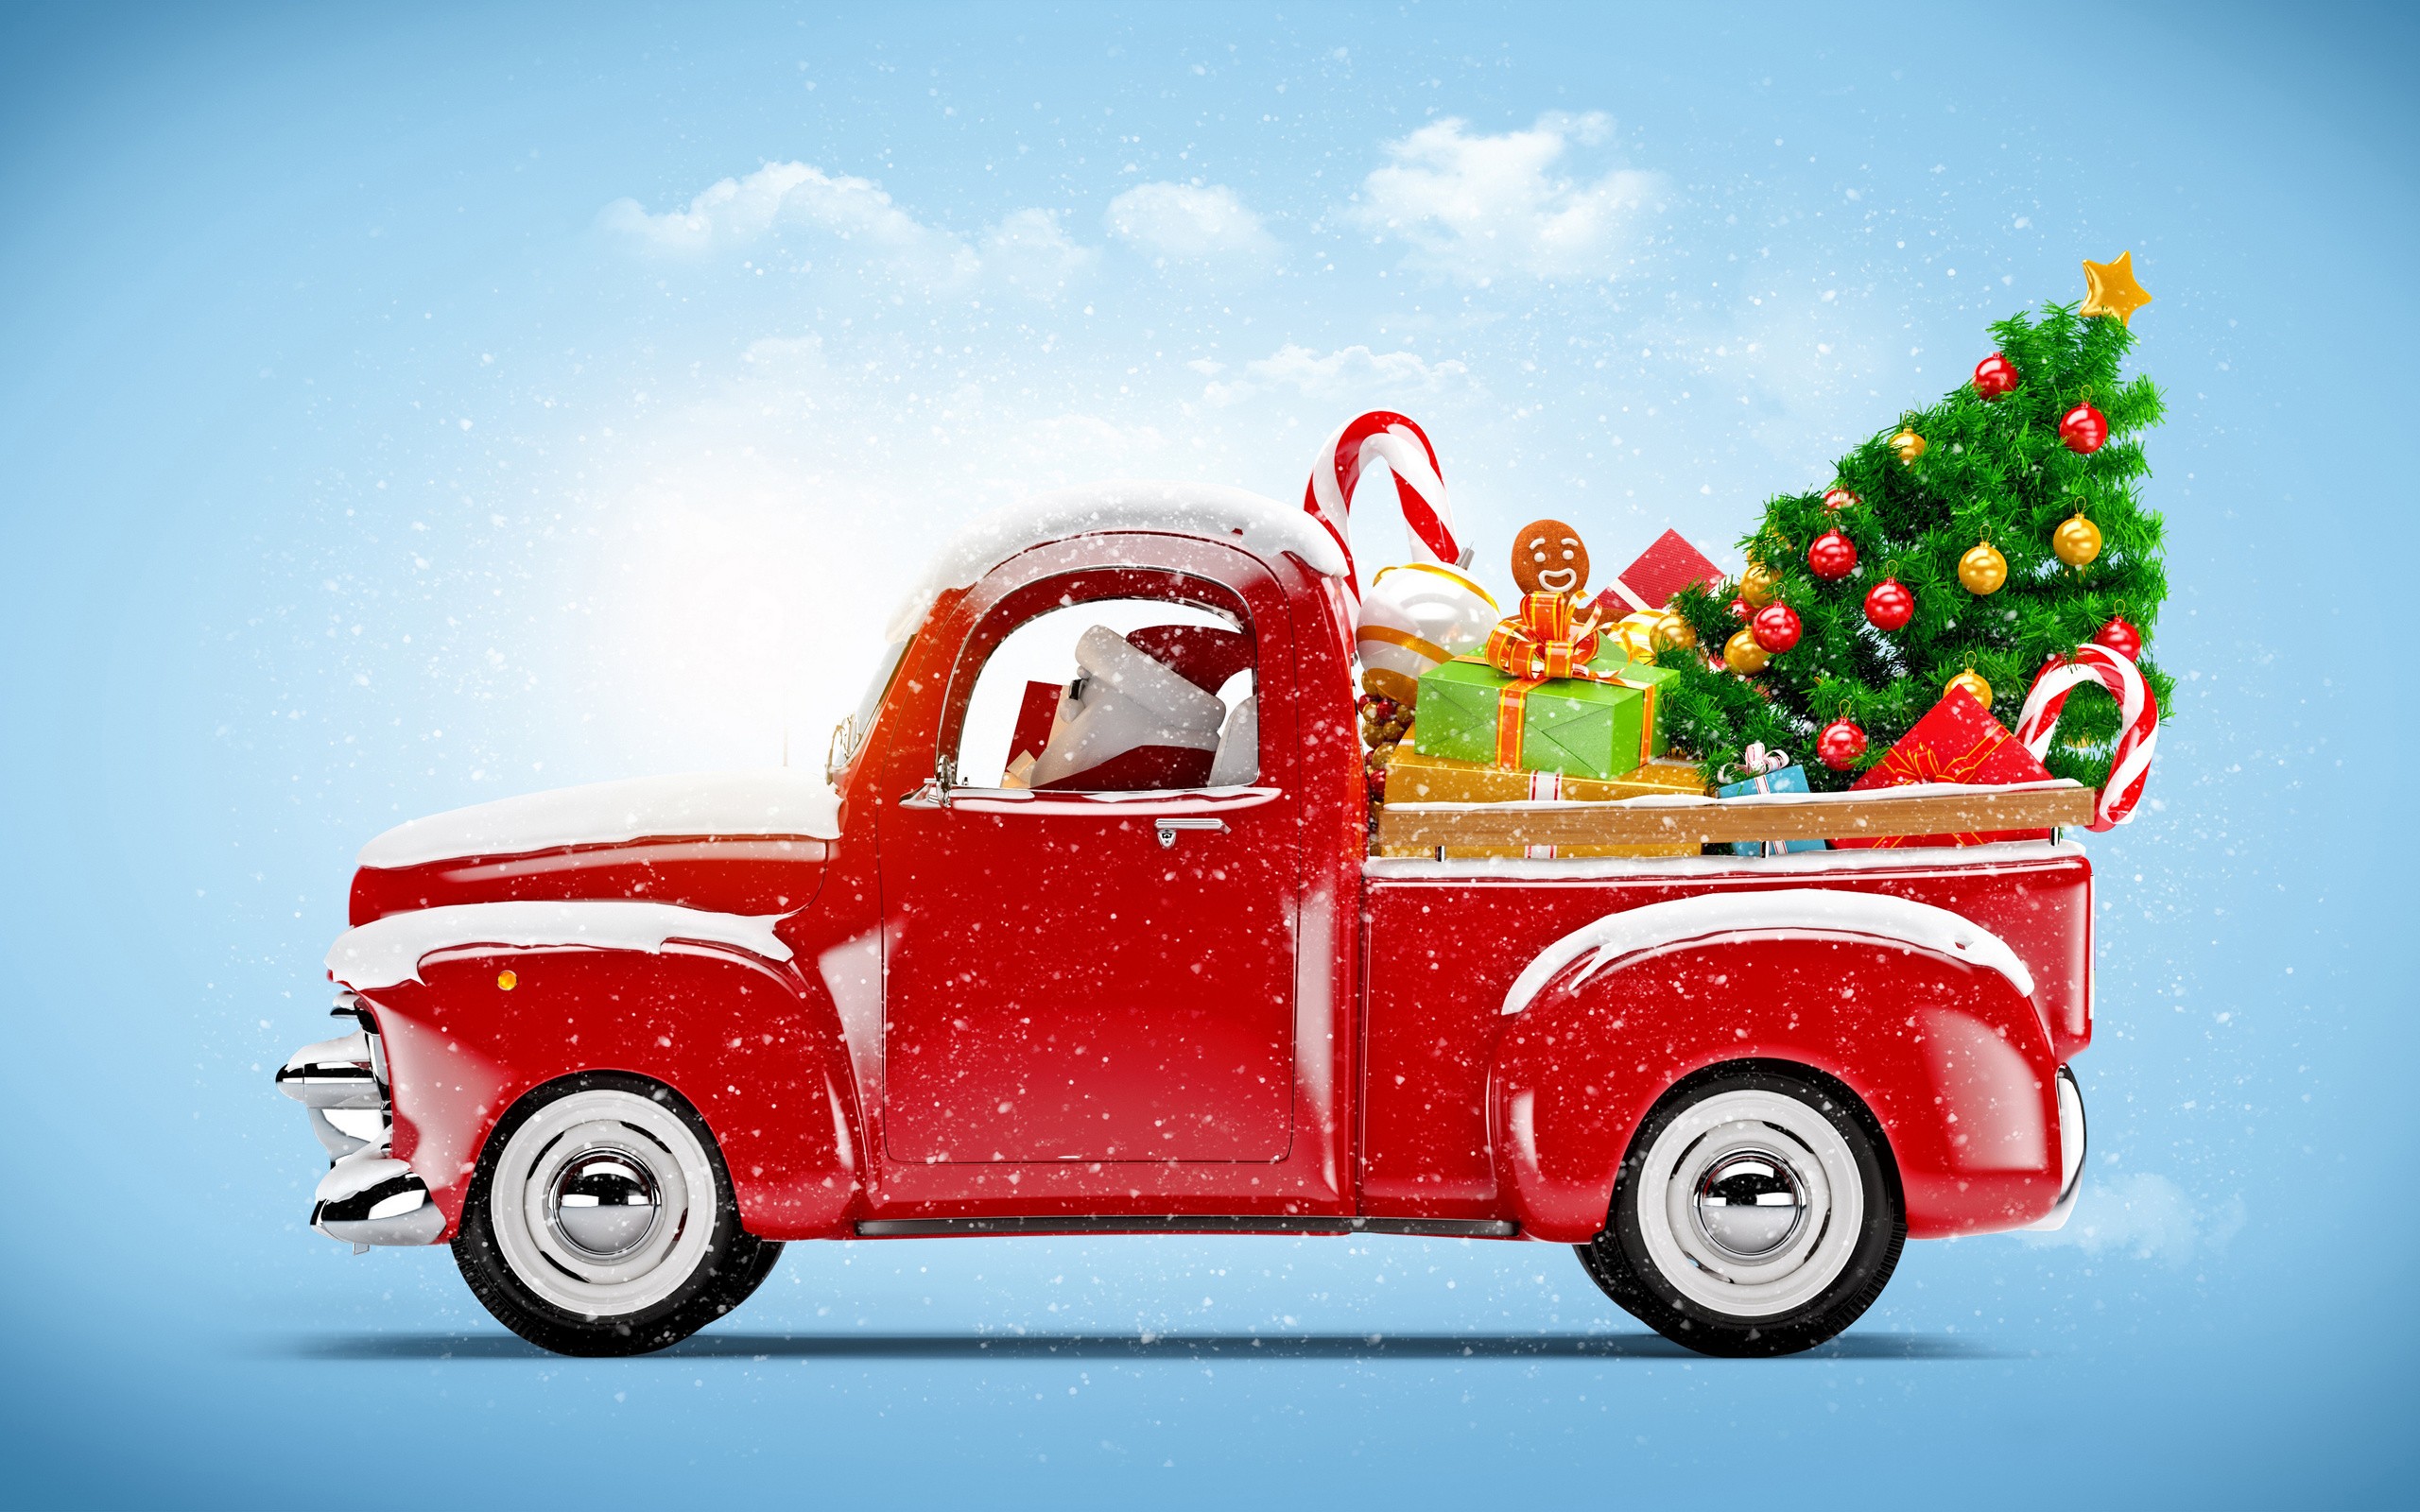 General 2560x1600 New Year snow car red cars Christmas blue background holiday vehicle Christmas presents Christmas tree